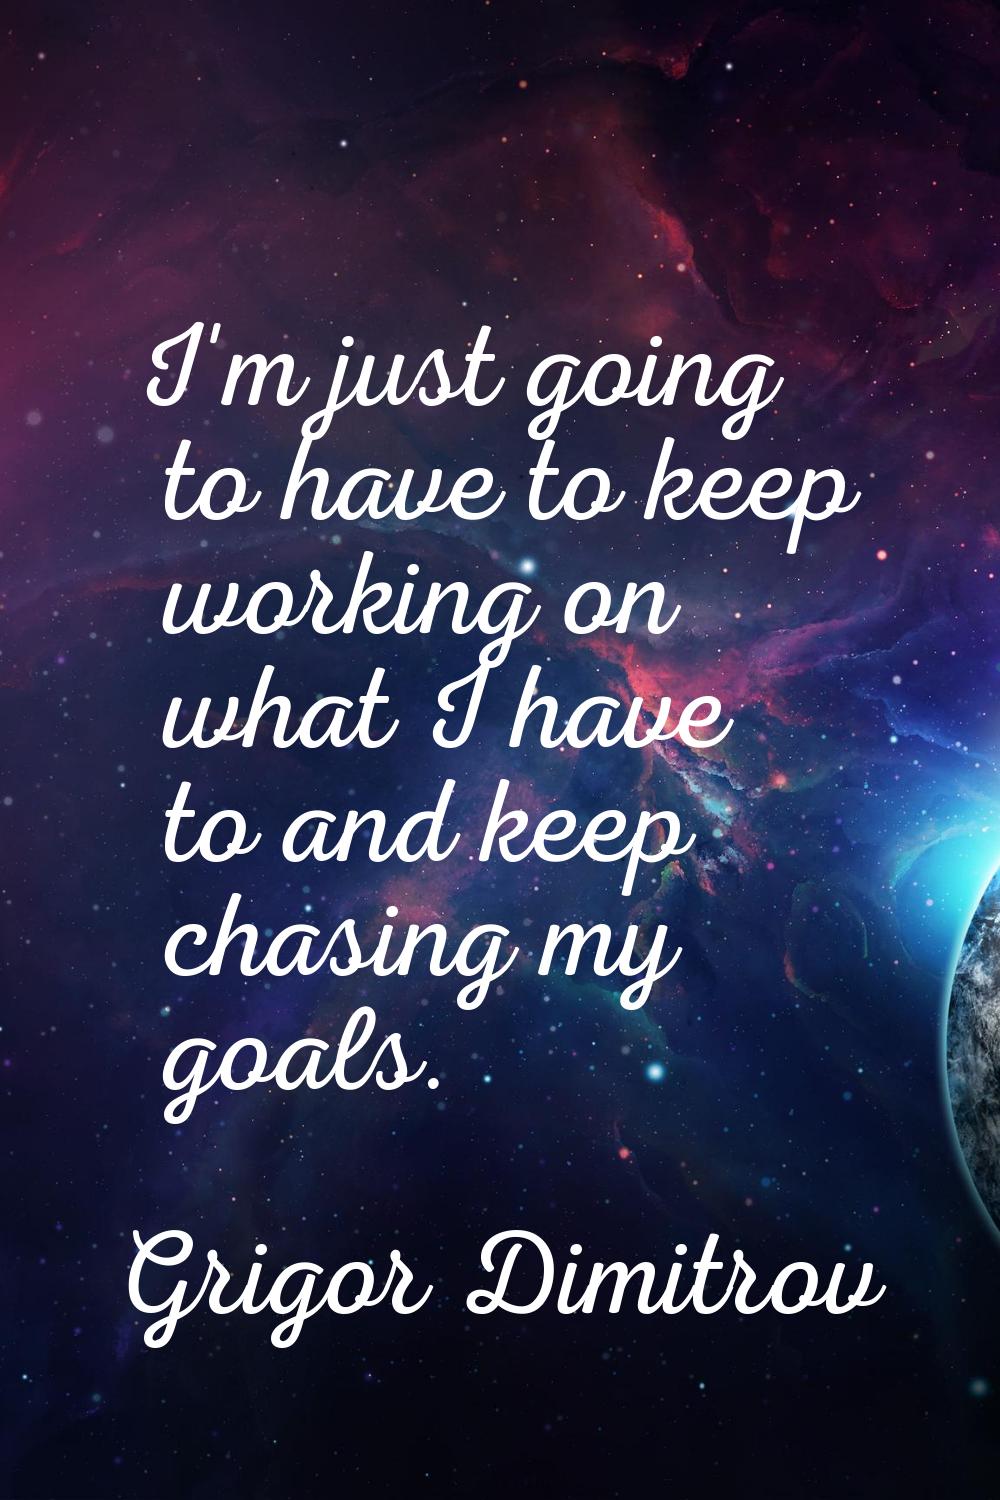 I'm just going to have to keep working on what I have to and keep chasing my goals.